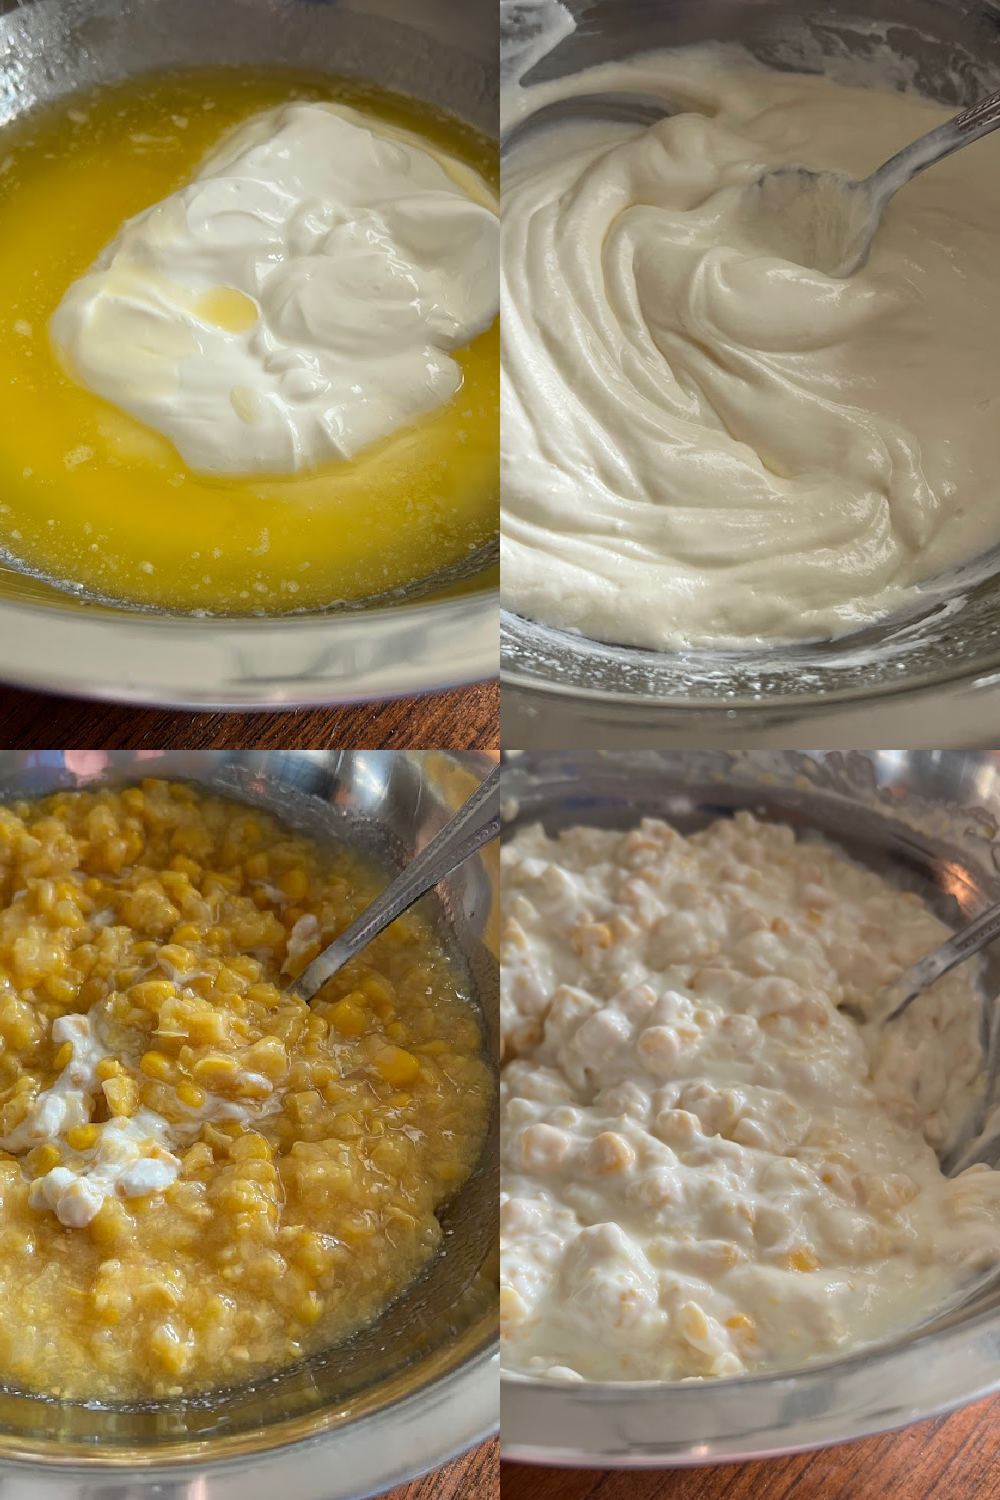 This is a four photo collage showing pictures making the corn casserole, mixing the ingredients in a large silver mixing bowl.